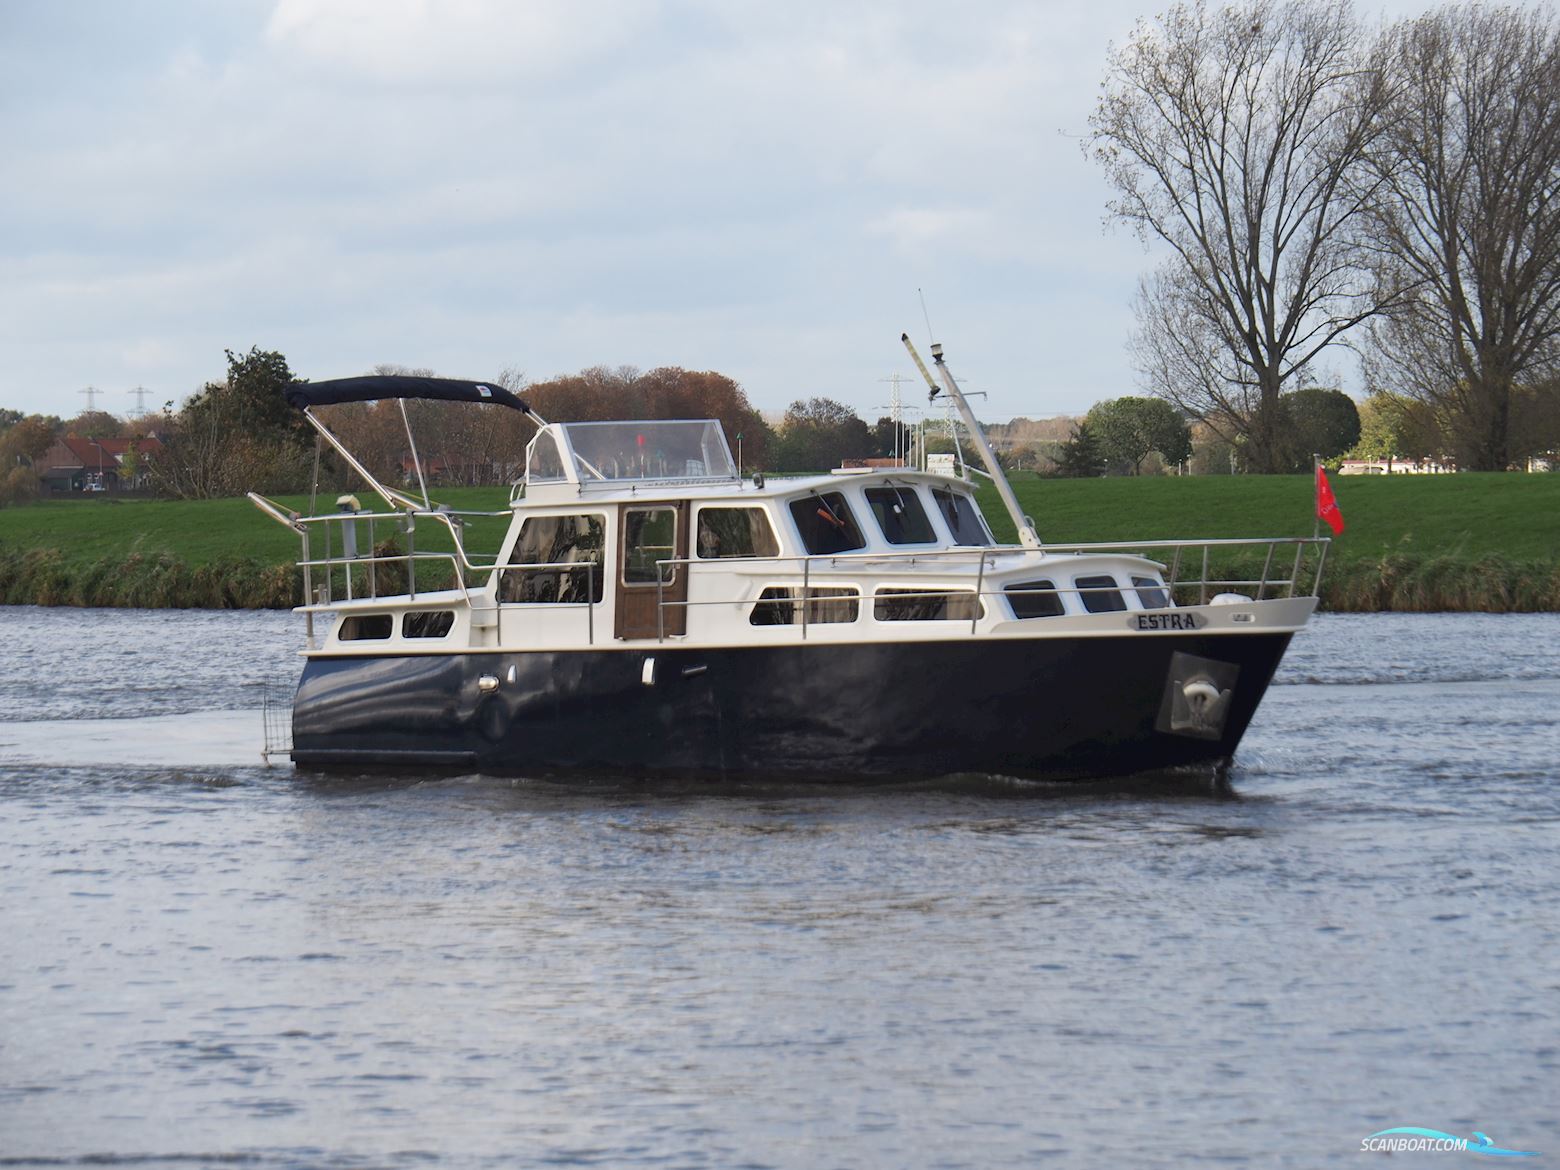 Meeuwkruiser 1000 Motor boat 1978, with Peugeot engine, The Netherlands